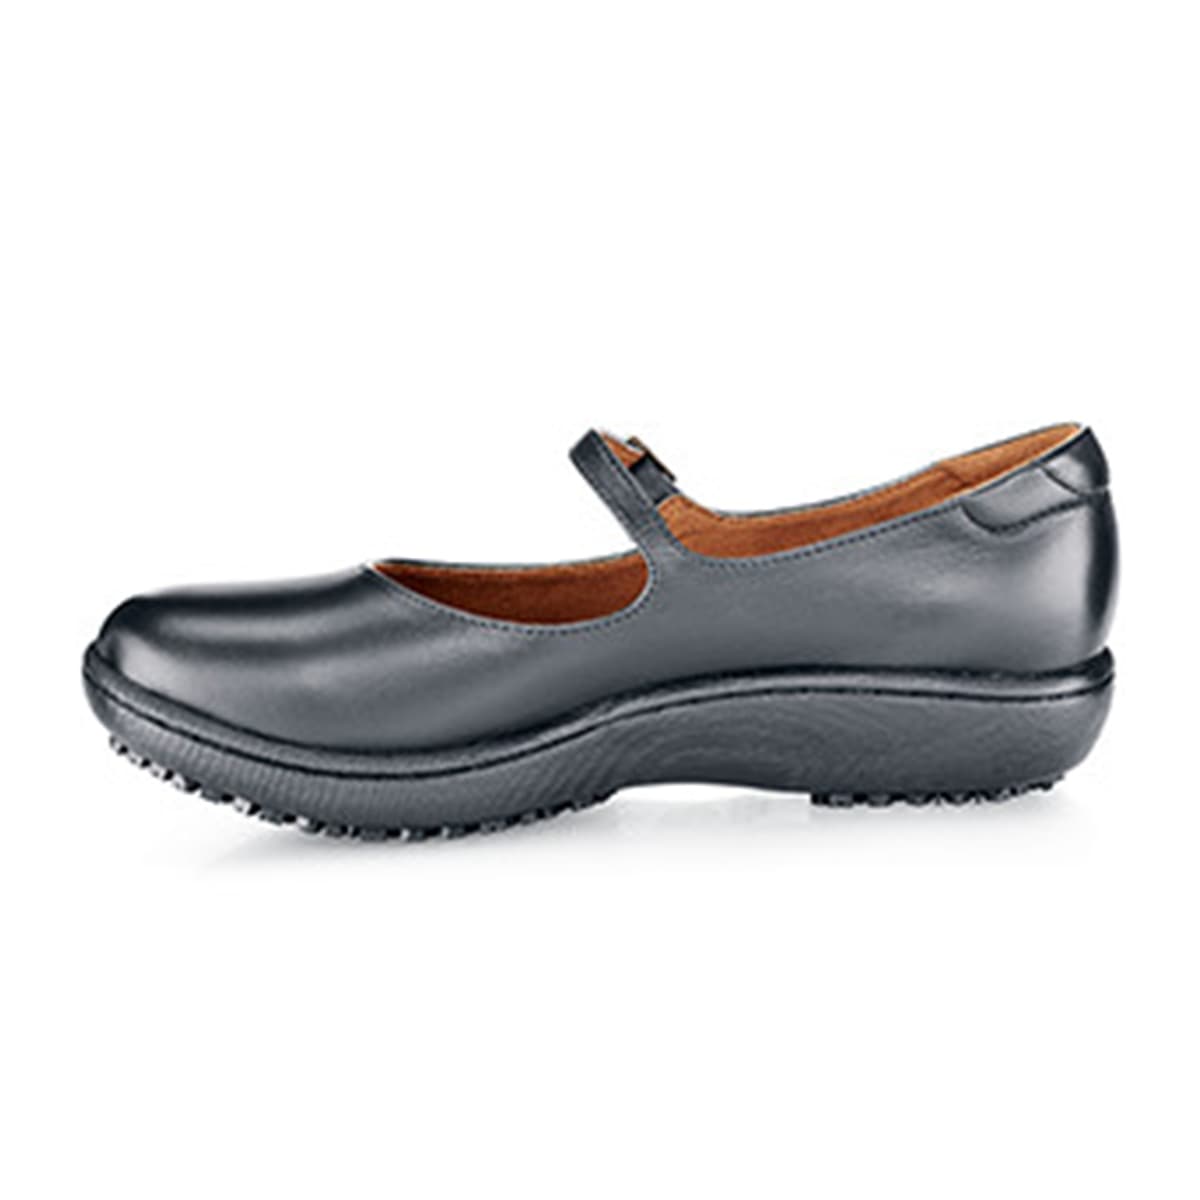 The Mary Jane II from Shoes For Crews are slip-resistant dress shoes designed to provide comfort throughout the day, seen from the left.